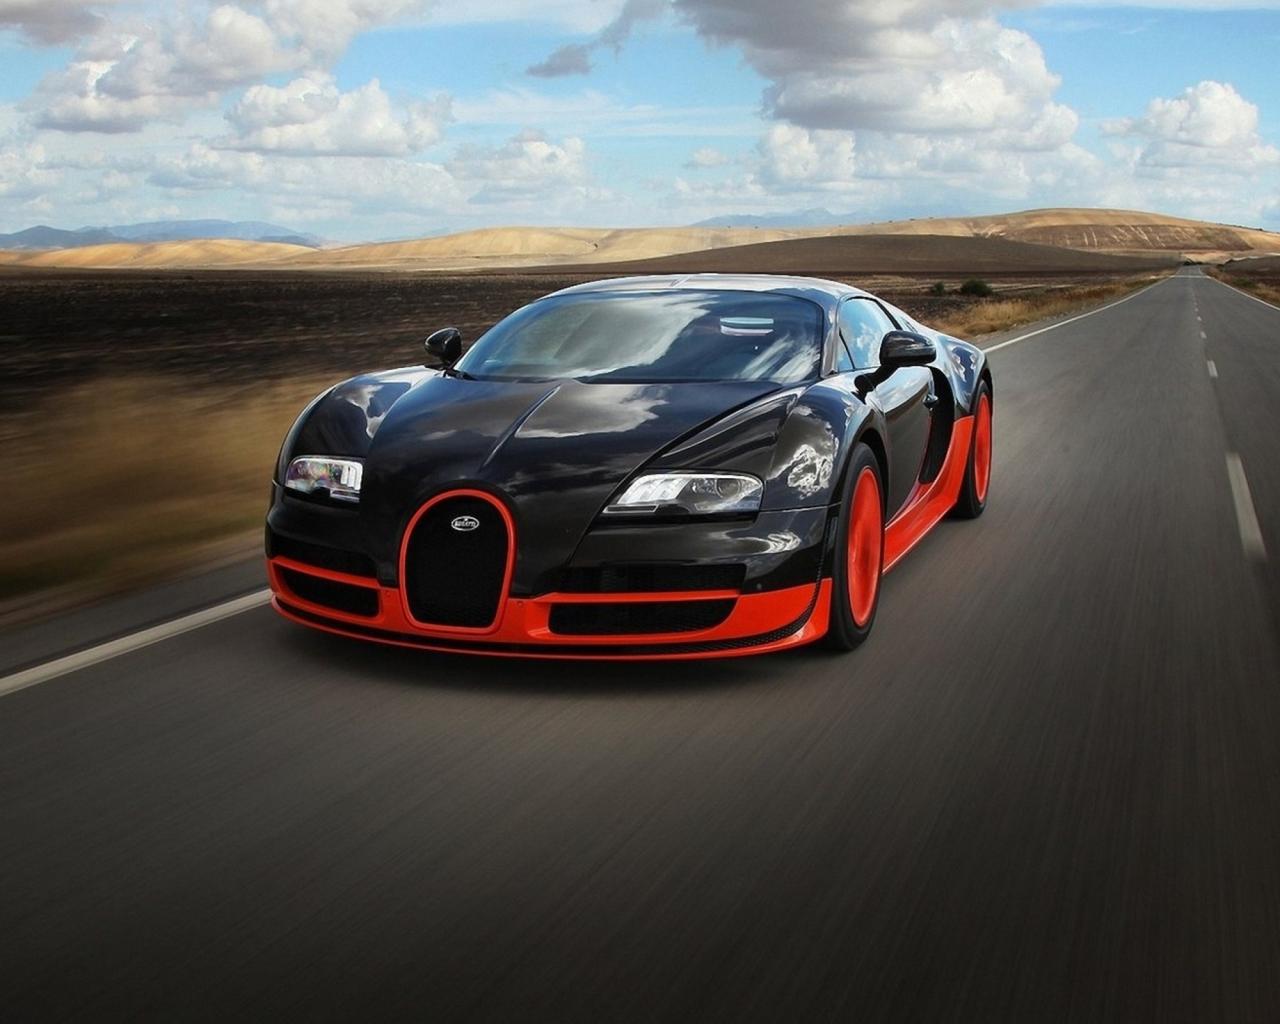 Free download Red Bugatti Veyron Wallpaper 6202 Hd Wallpapers in 1280x1024